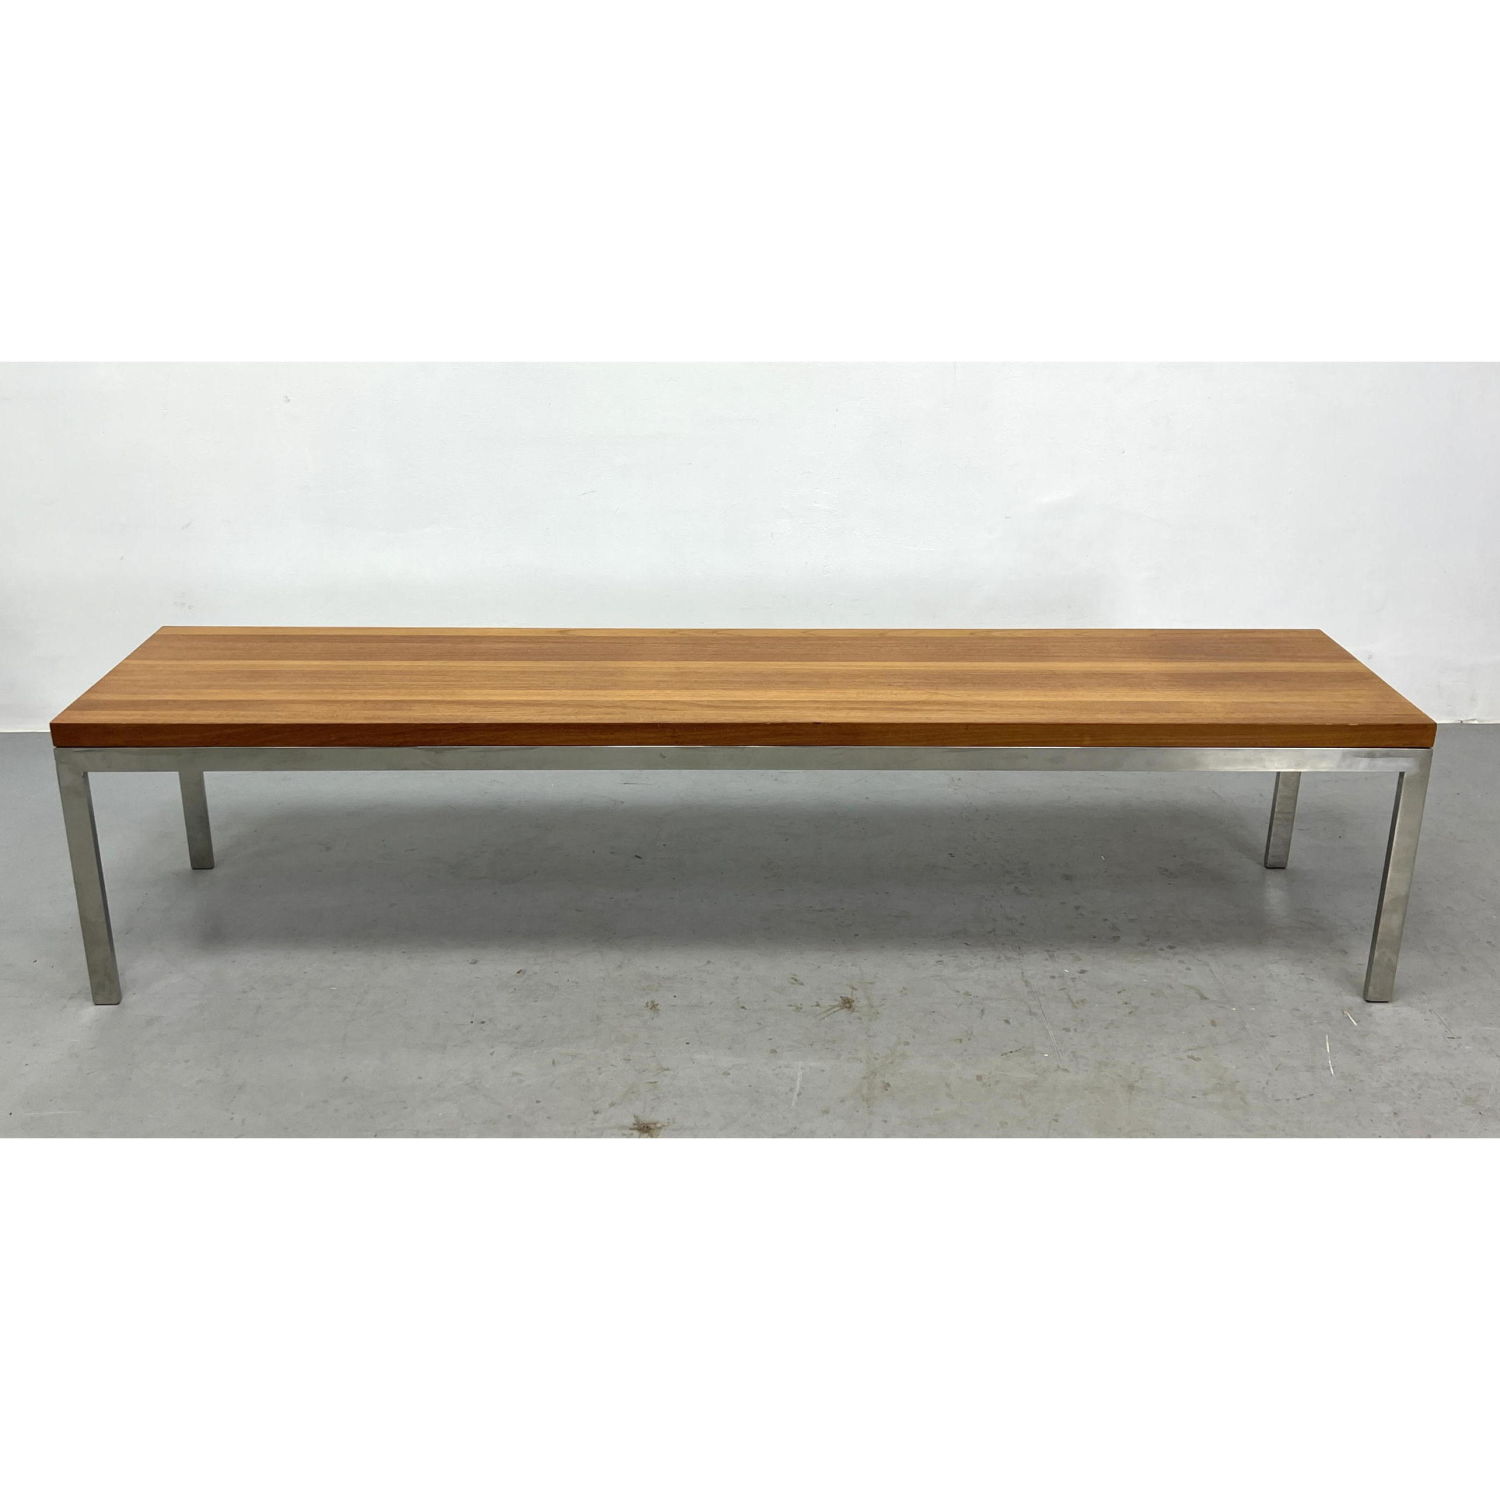 Chrome and Wood long coffee table 2ff17d